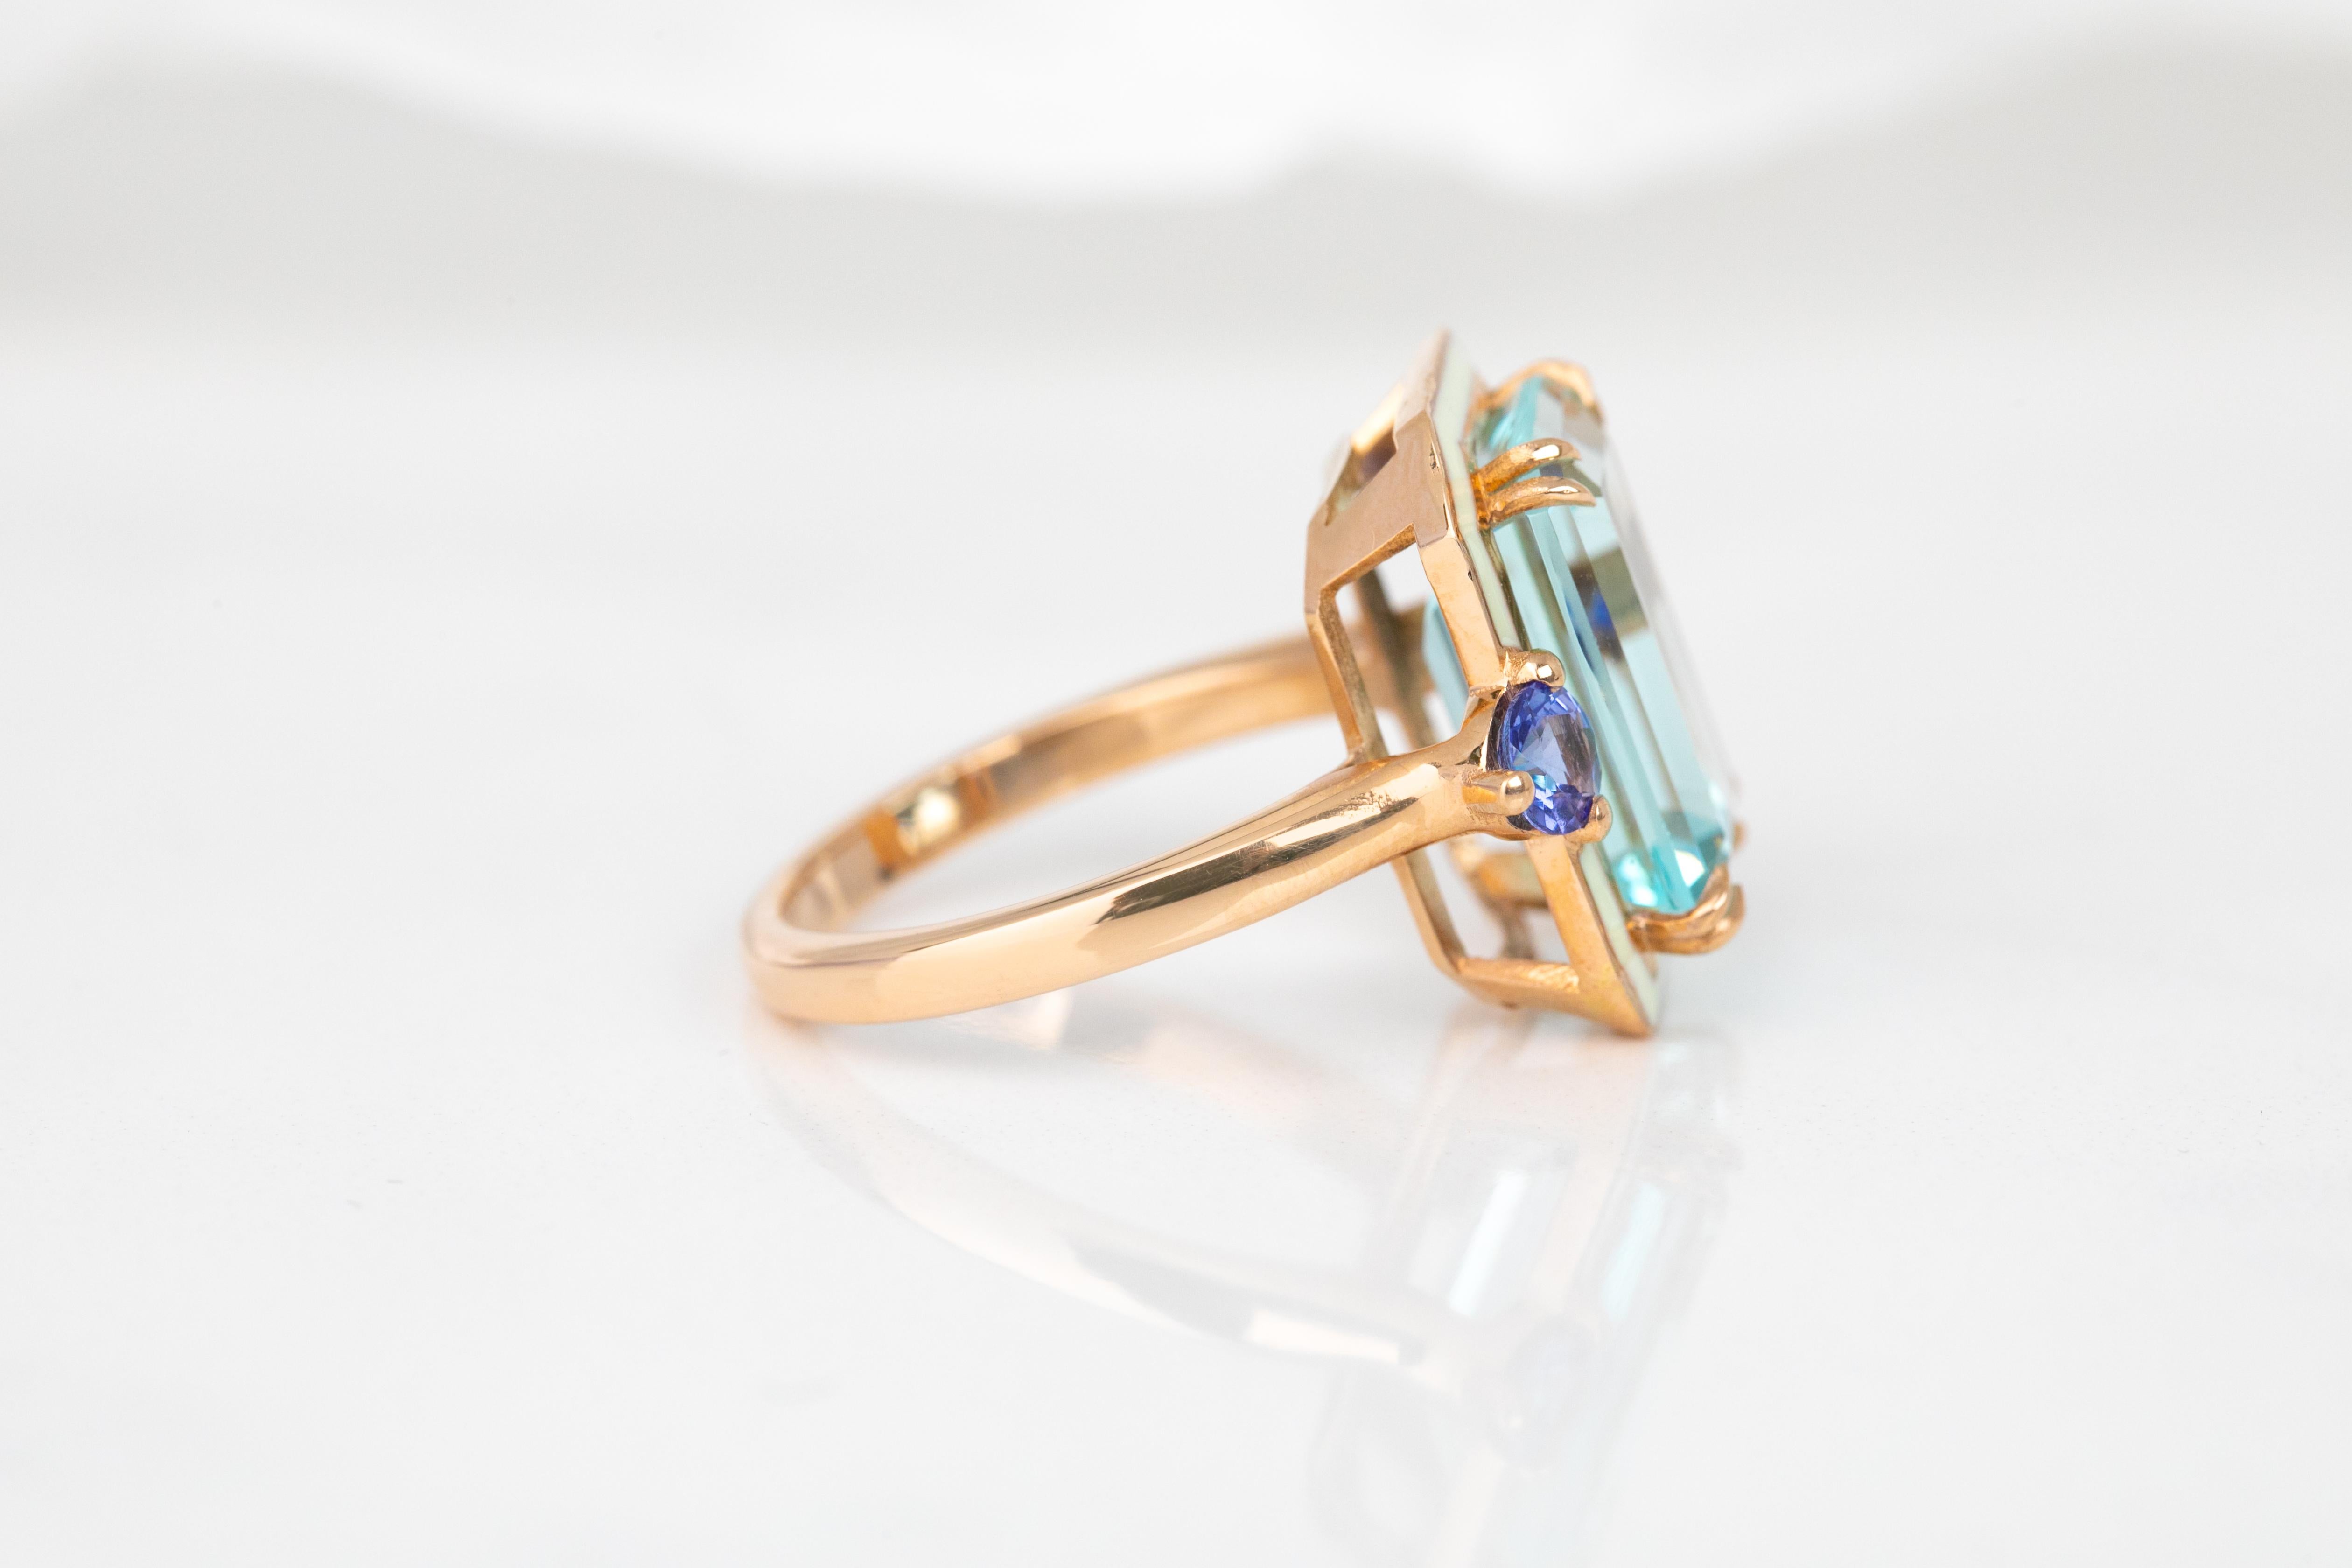 For Sale:  Art Deco Style 14k Rose Gold Ring 6.13ct Sky Topaz and 0.40ct Ceylon Sapphire 17